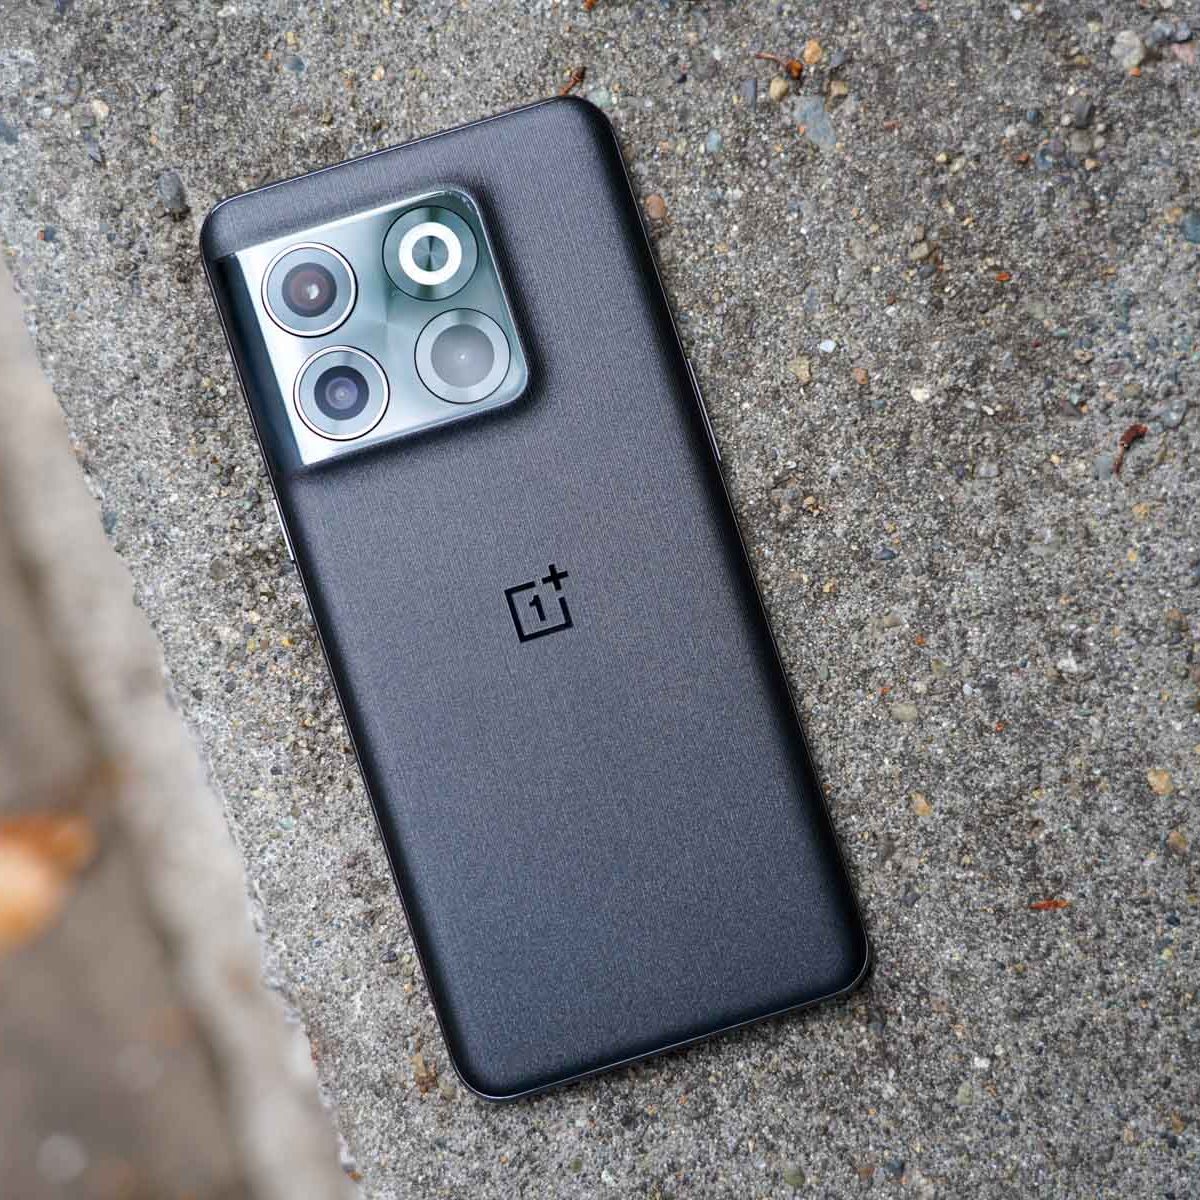 OnePlus 11 5G, OnePlus Buds Pro 2 are now official: Here's what is new